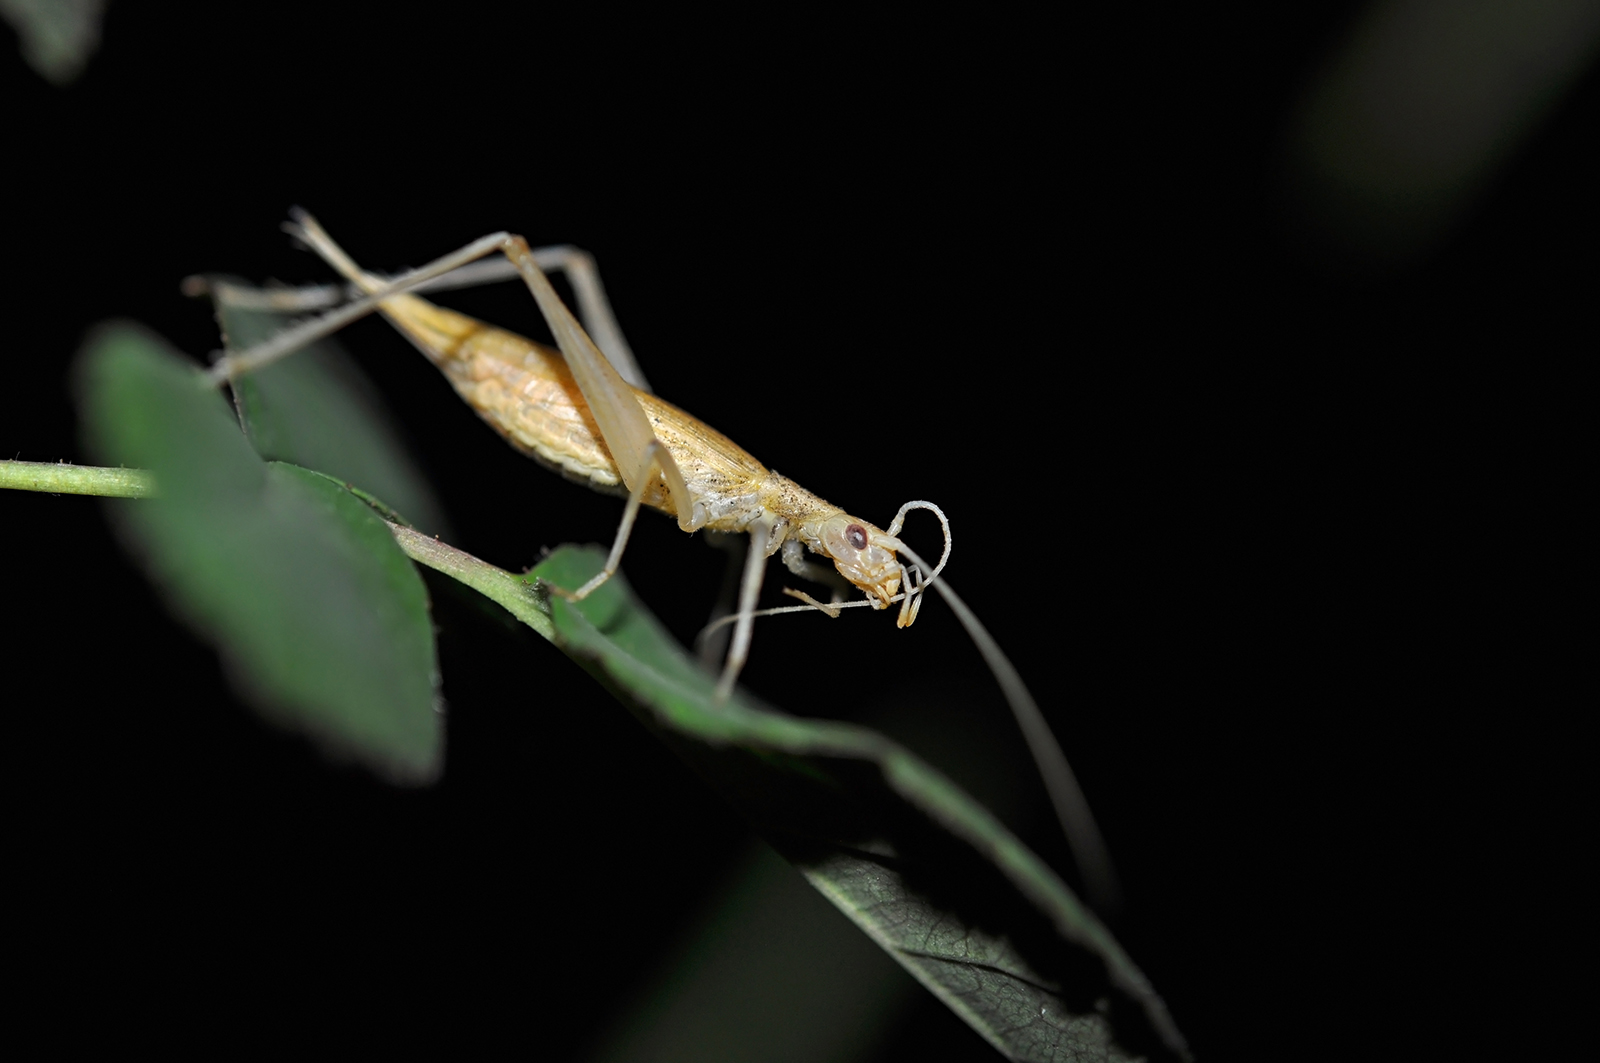 Why do crickets make noise at night?